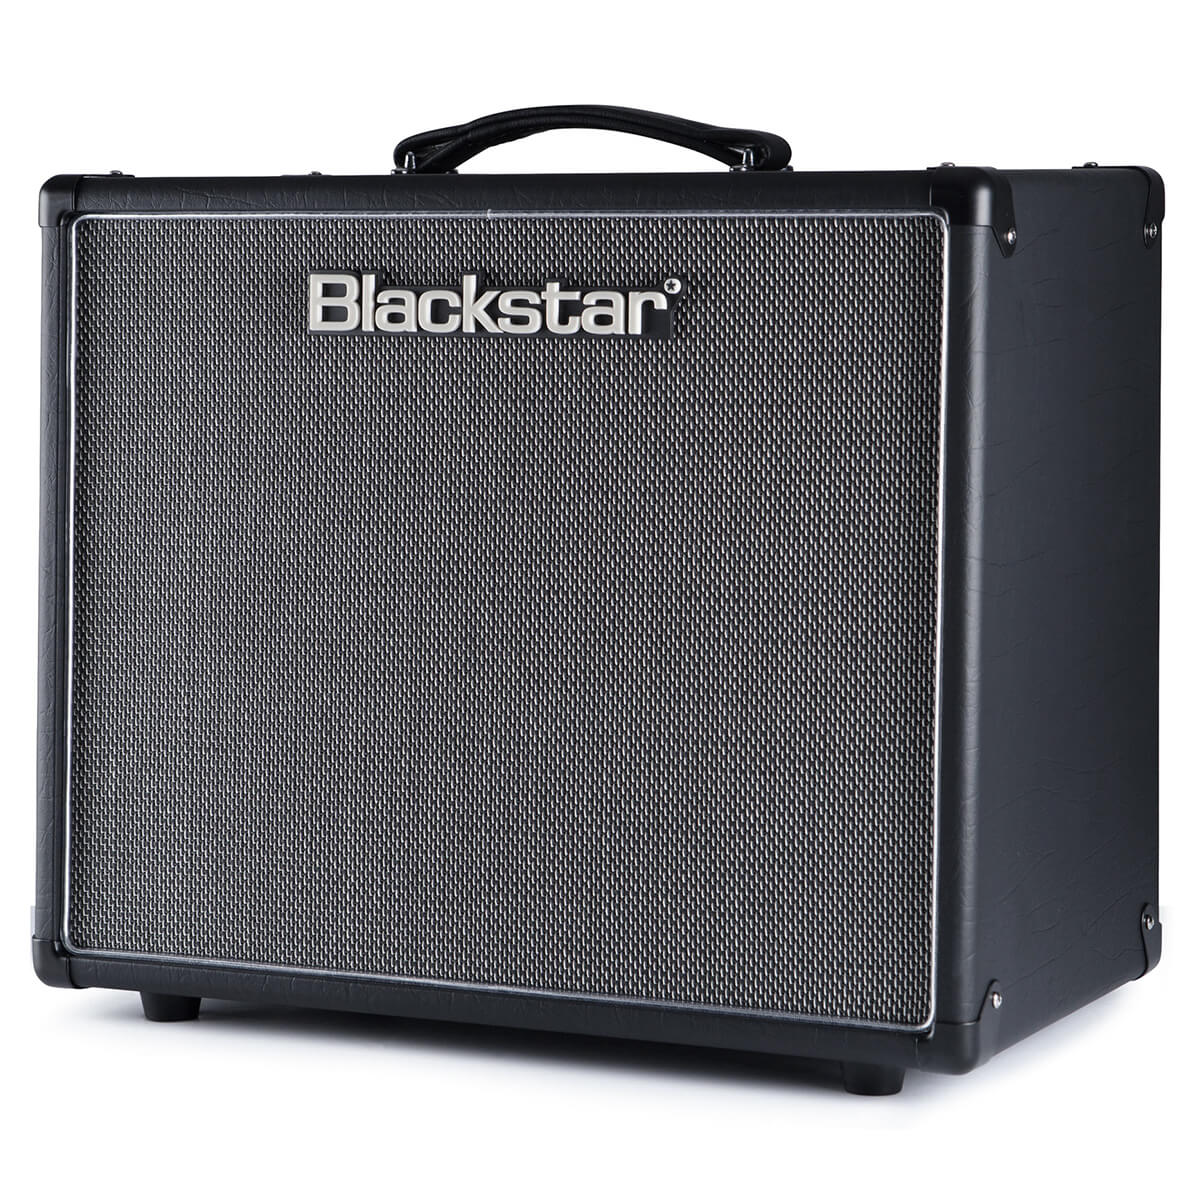 Blackstar HT-20R MKII COMBO 20W 1 x 12" Valve Combo with Reverb